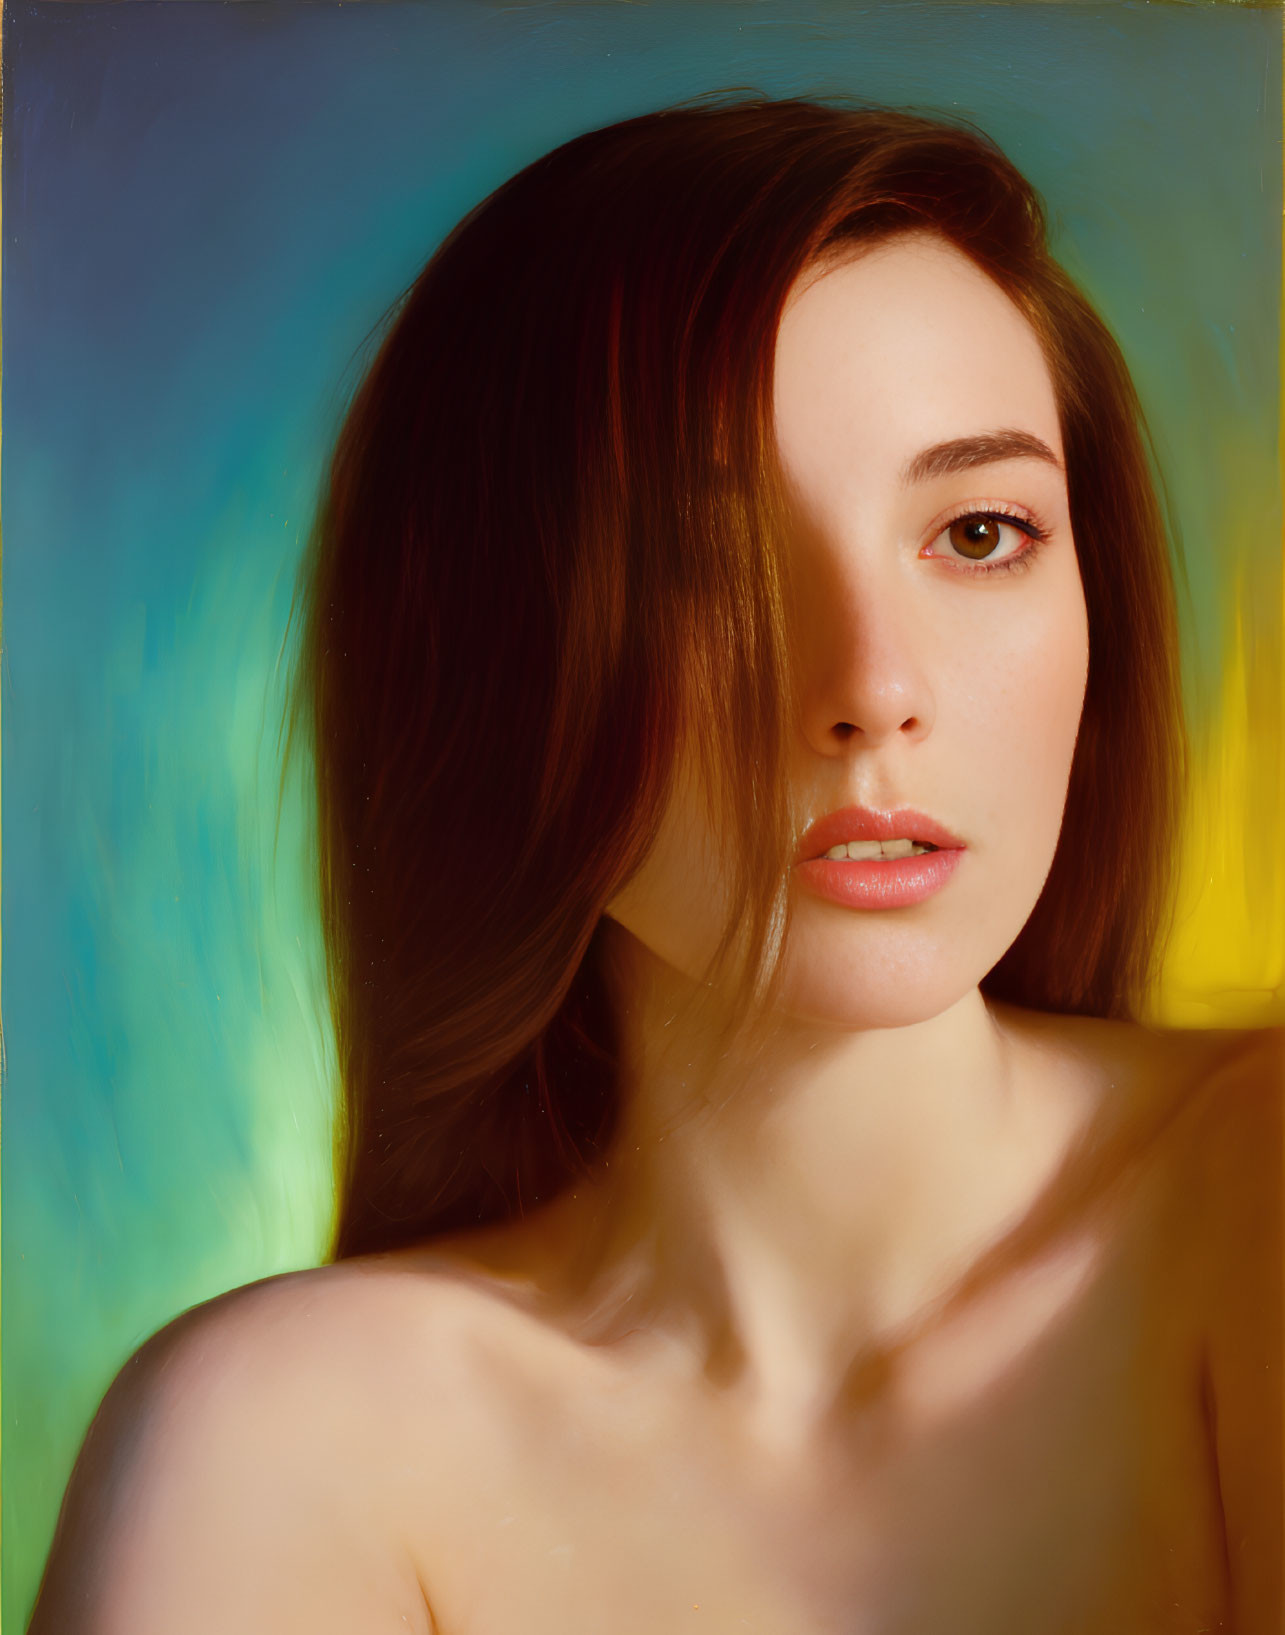 Woman with Brown Hair and Fair Skin in Calm Expression Against Colorful Abstract Background